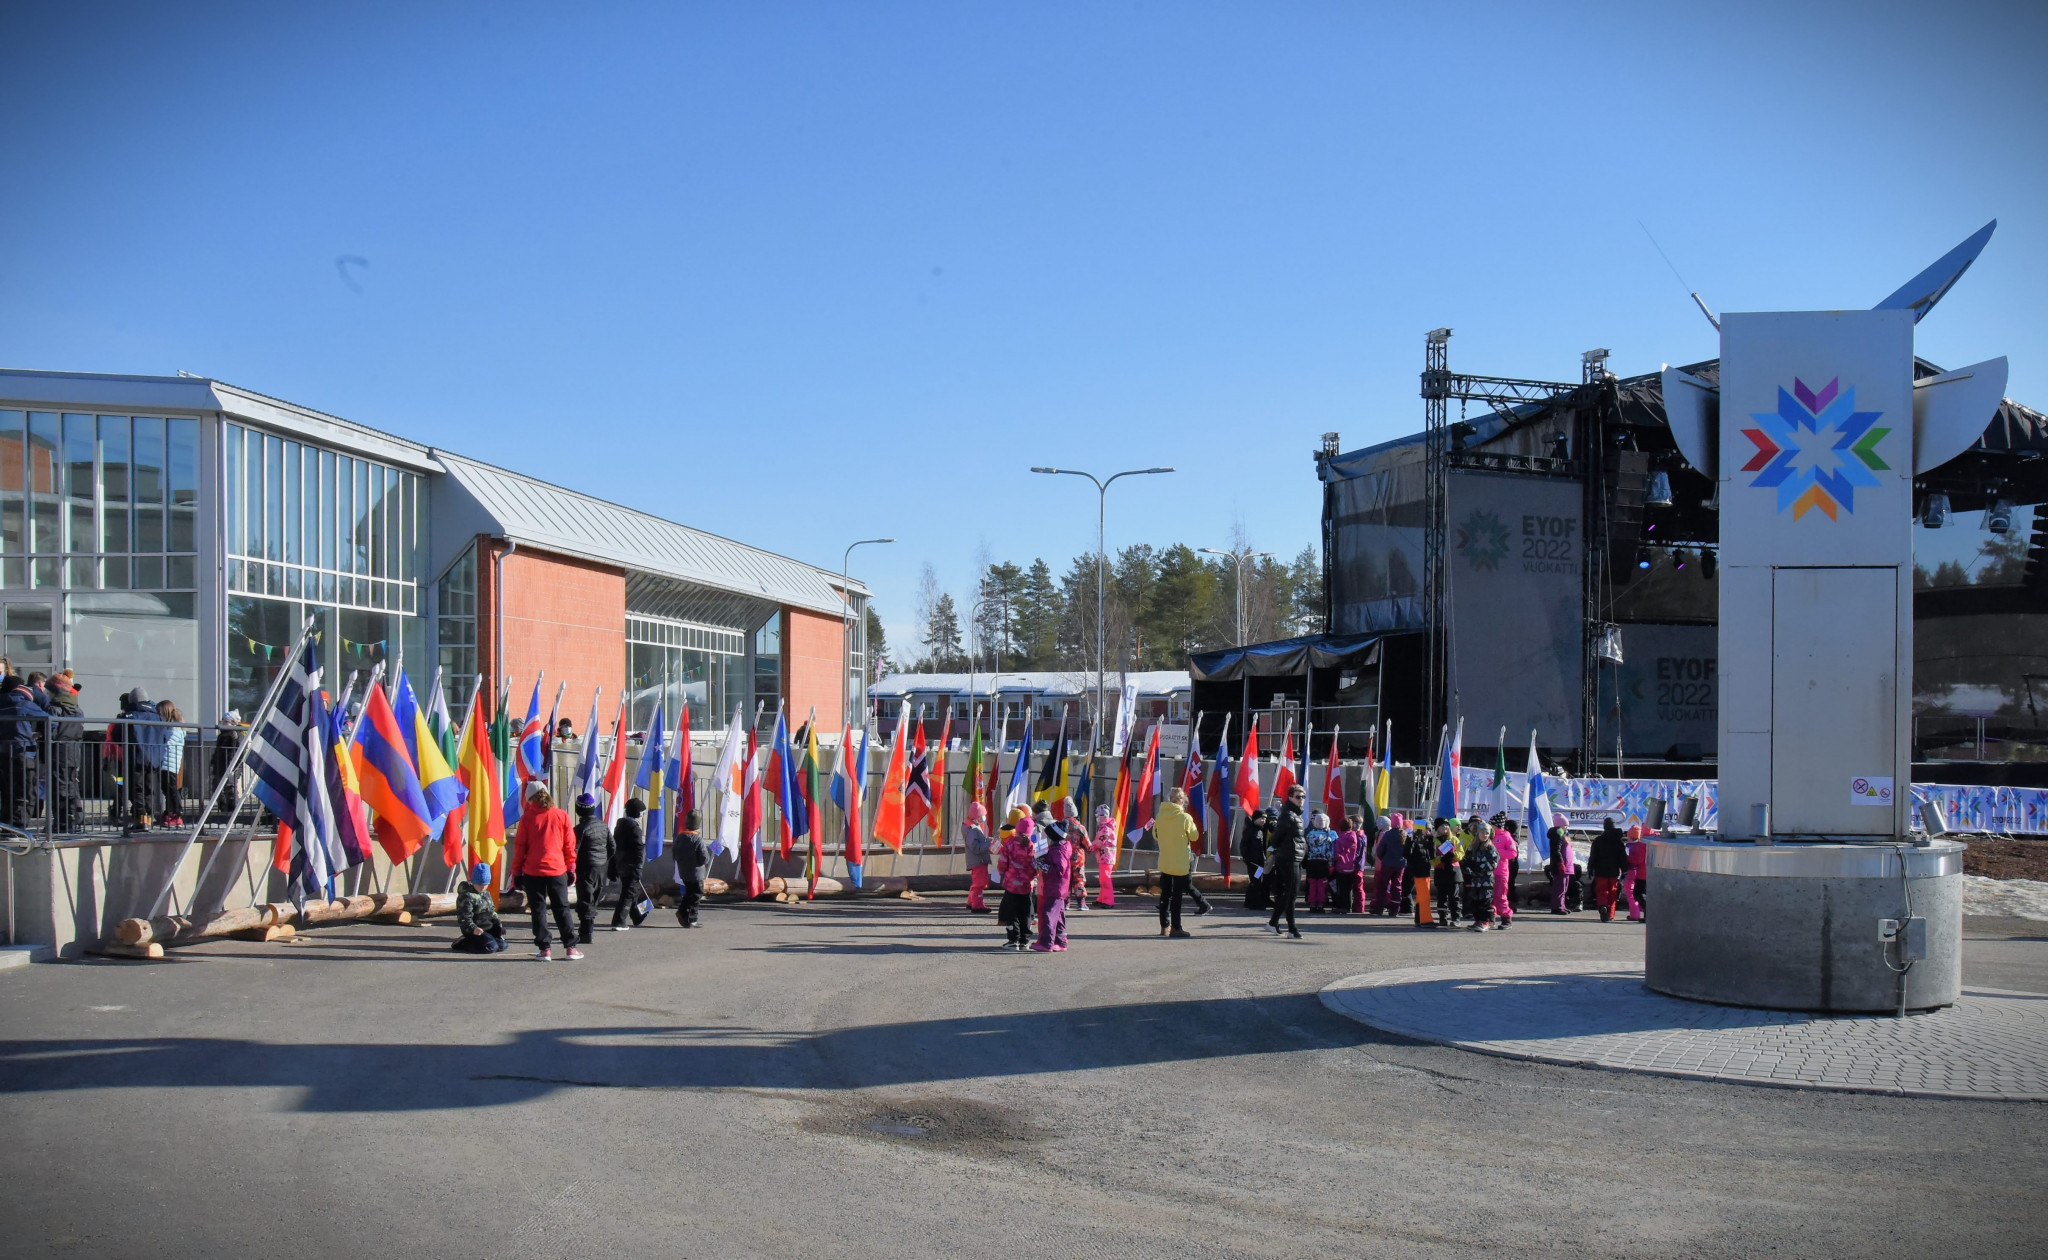 A total of 44 countries are featuring at the Winter EYOF in Vuokatti, with the flags displayed alongside the burning Flame of Peace ©Matti Leinonen/EYOF Vuokatti 2022